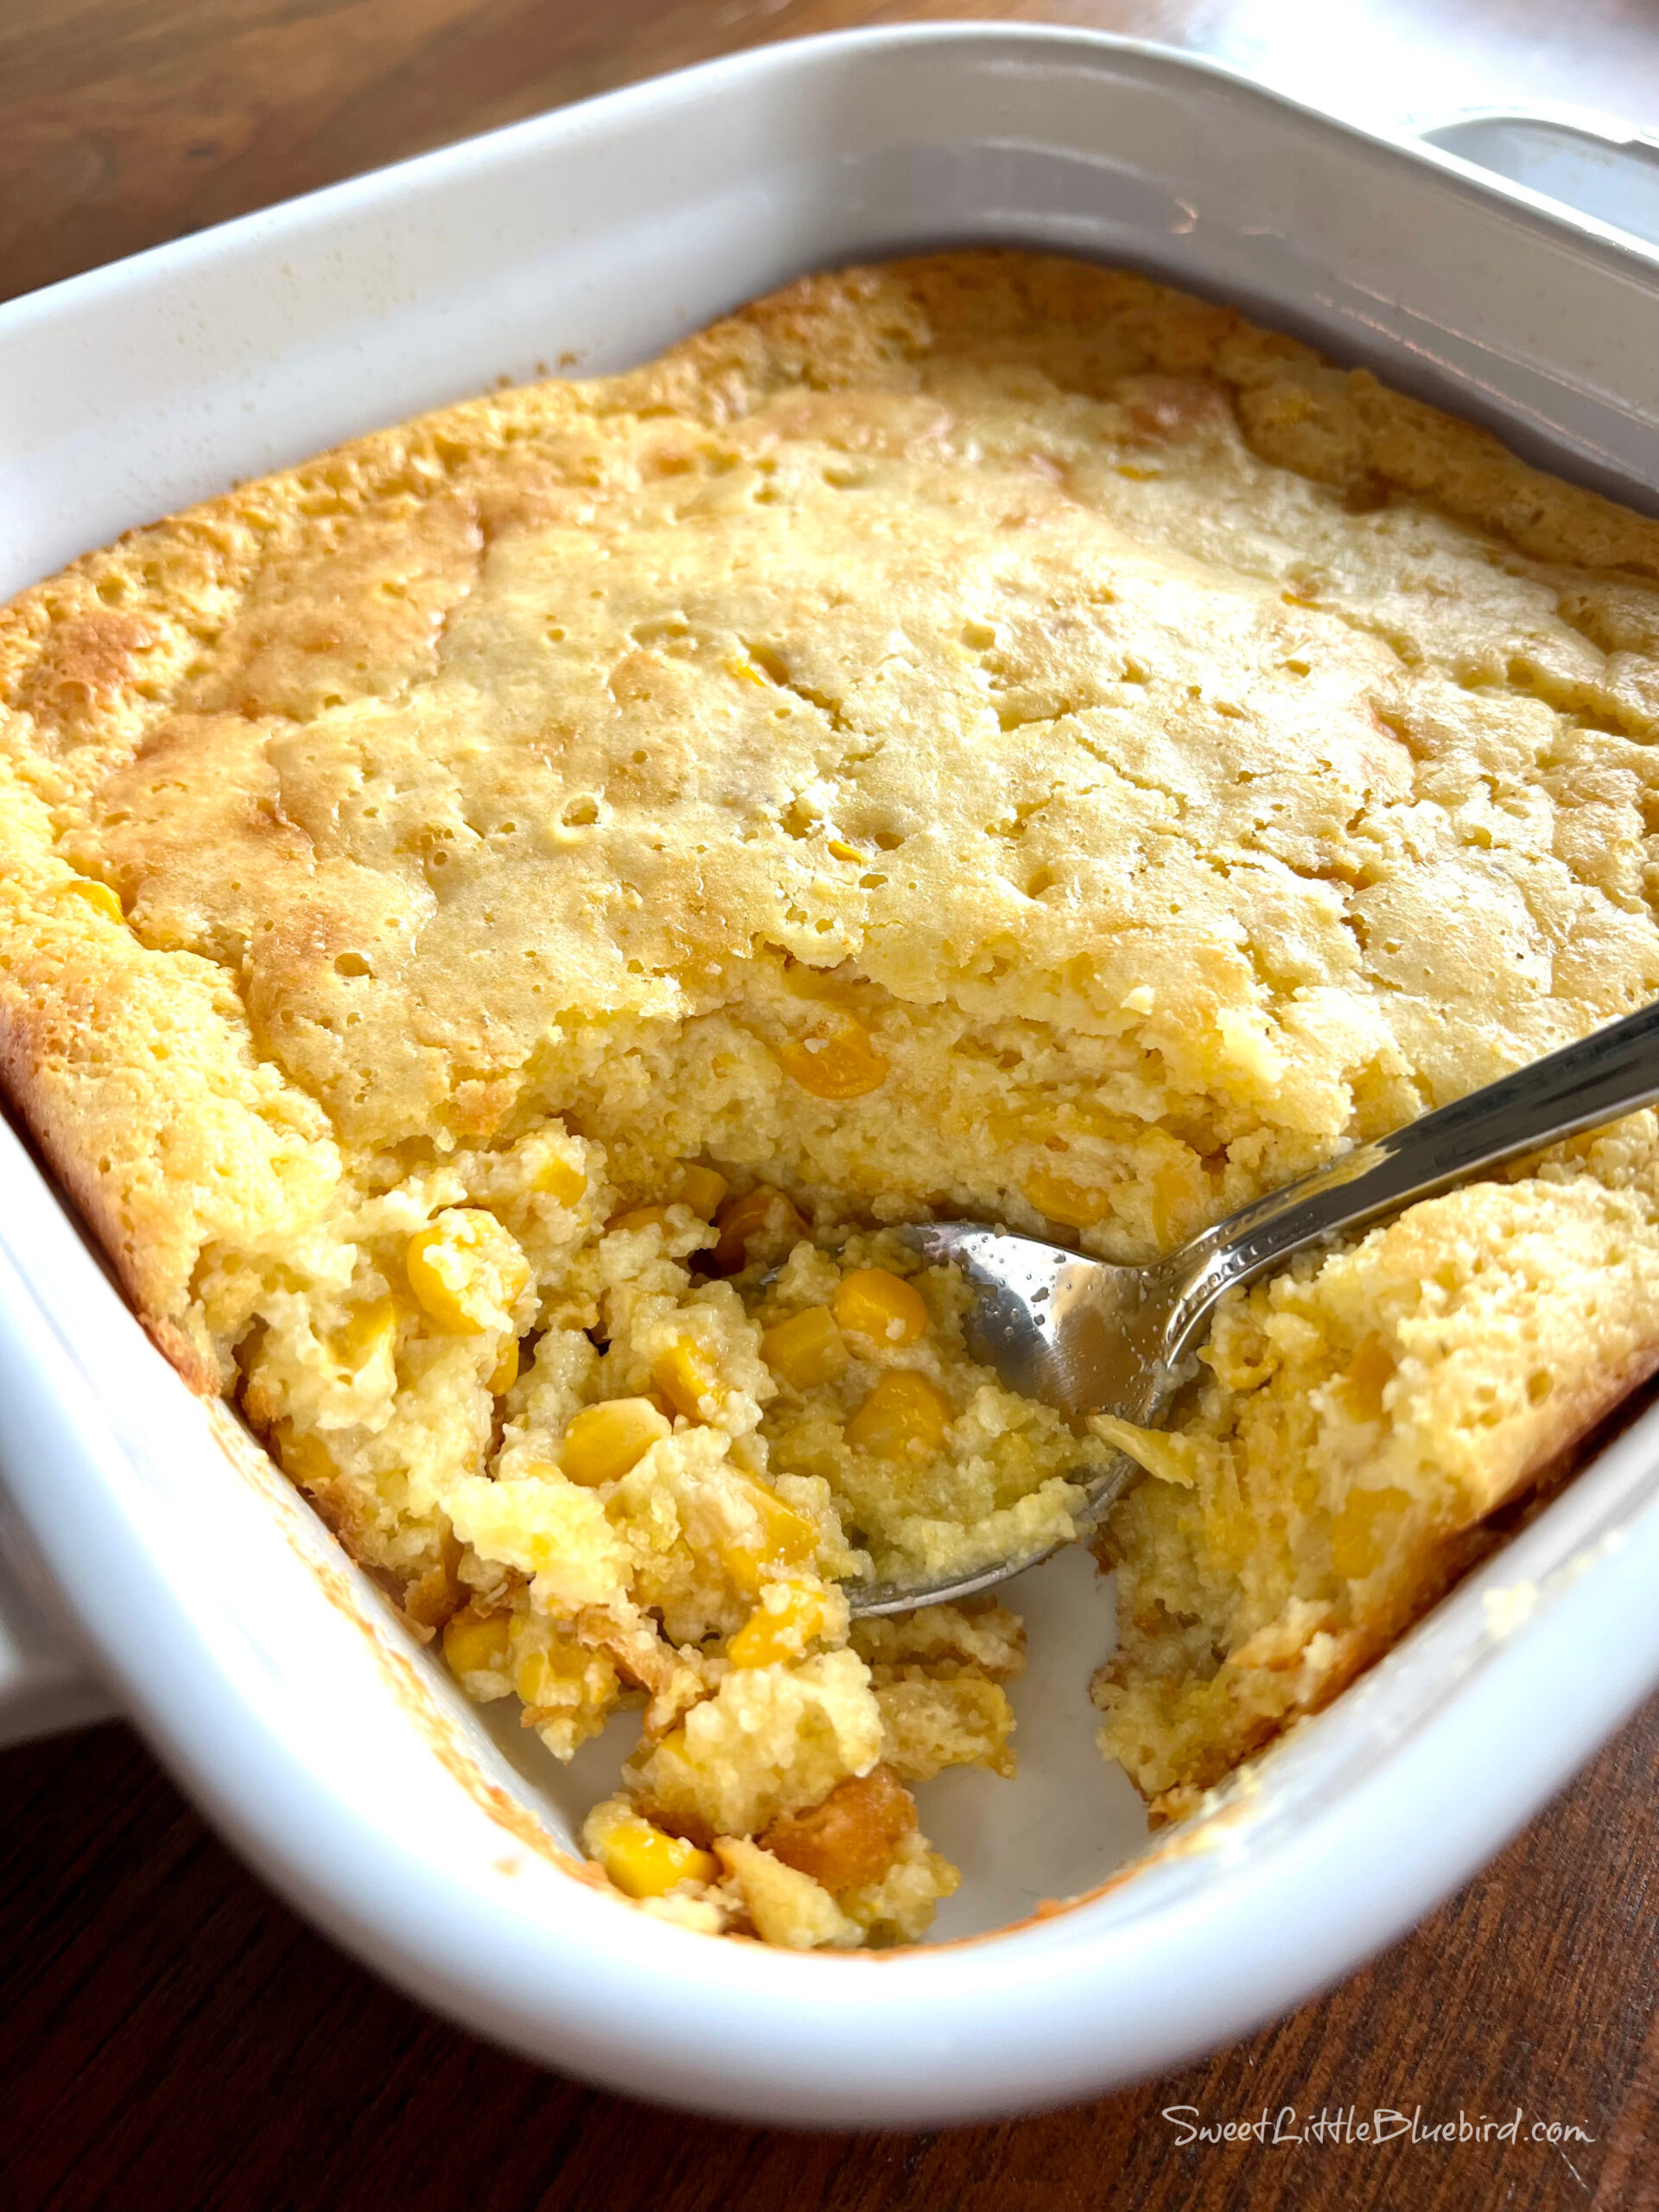 This is a photo of Jiffy Corn Casserole baked in a square white baking dish with a spoon ready to serve.